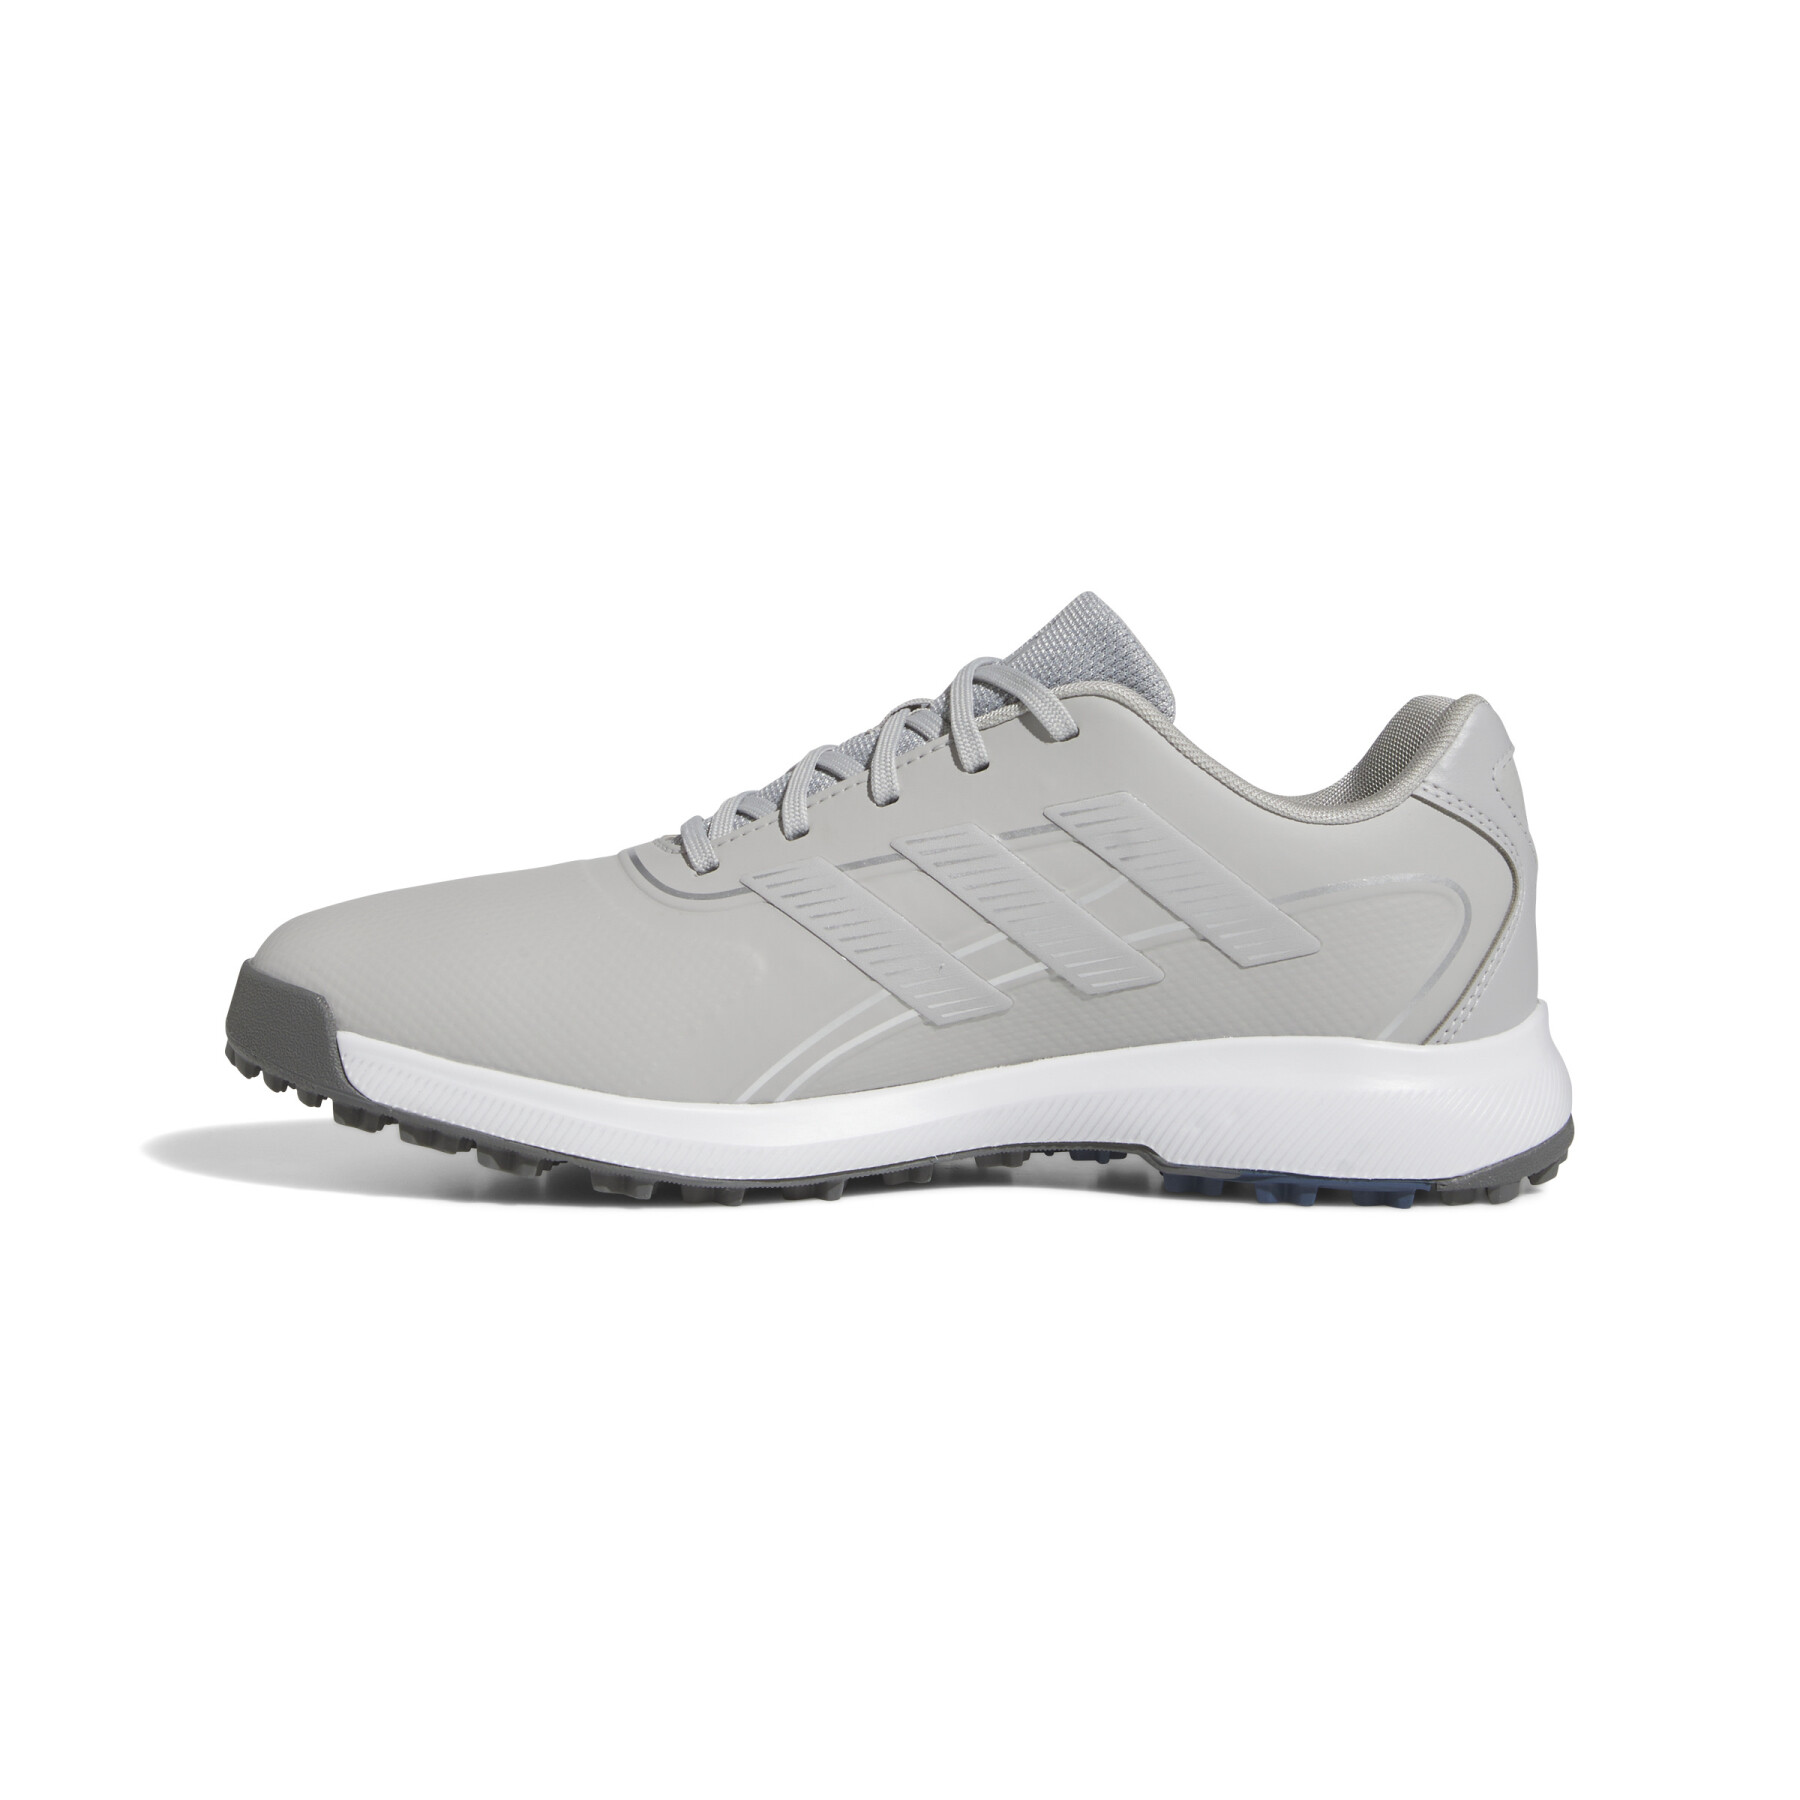 Spikeless golf shoes adidas Traxion Lite Max SL